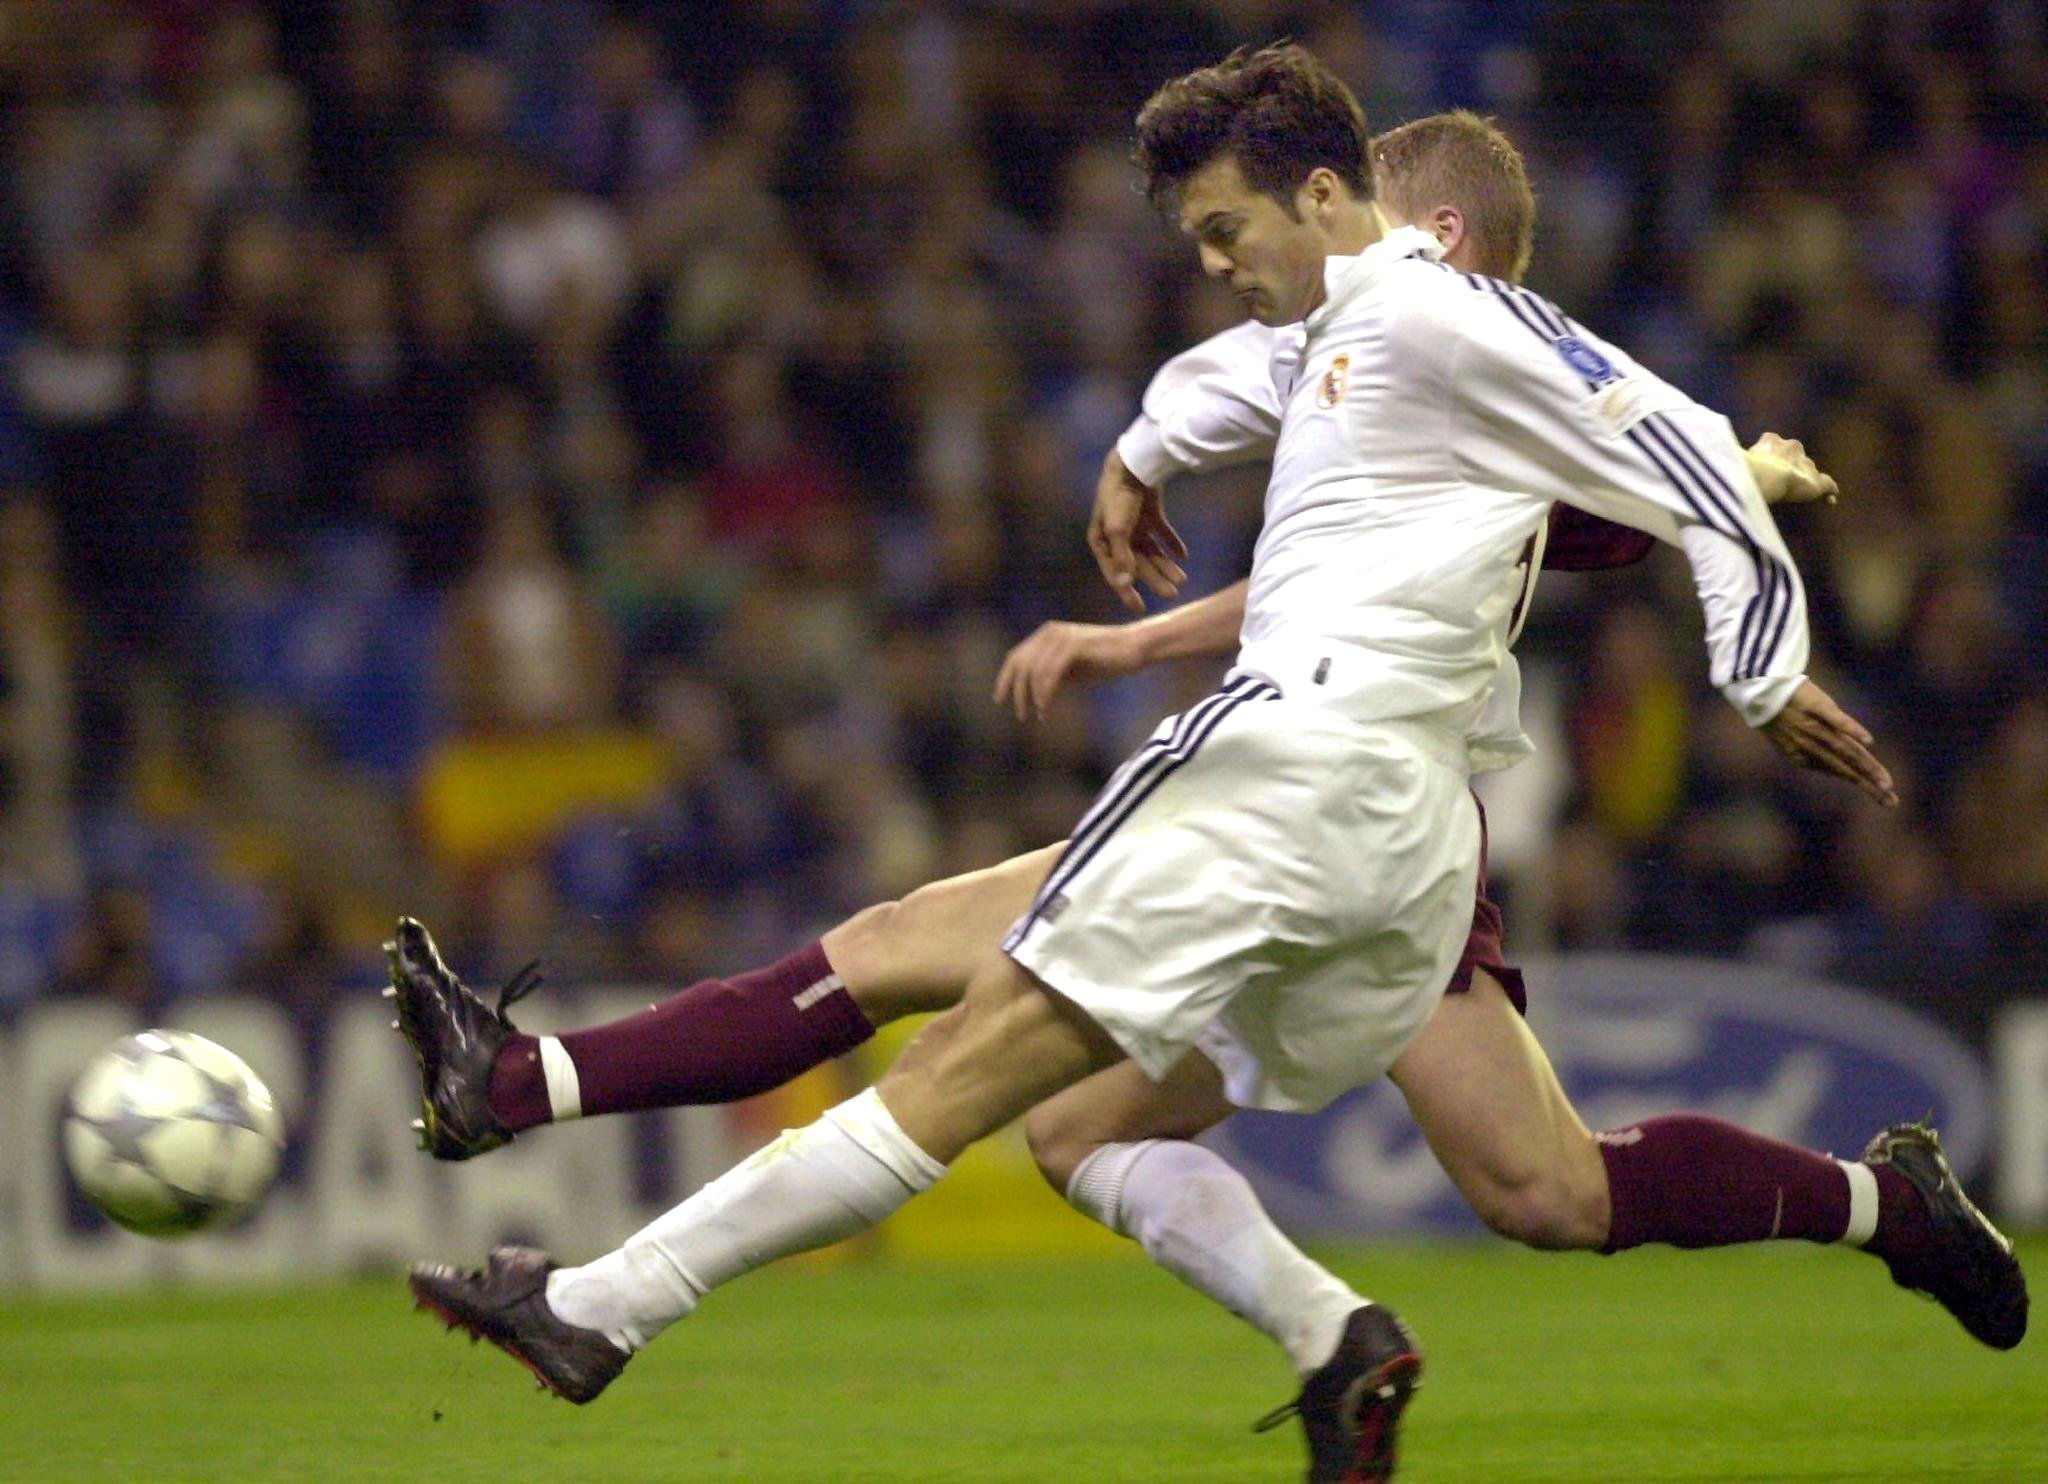 epa07131038 (FILE) - Real Madrid's Santiago Solari (front) fights for the ball with Sparta Prague's Jiri Jarosik (background) during their Champions League group C soccer match at the Santiago Bernabeu stadium in Madrid, Tuesday 12 March 2002. Solari was appointed on 29 October 2018 as interim replacement of Julen Lopetegui as head coach of Real Madrid. Lopetegu was sacked following the team's defeat against Barcelona on 28 October. c